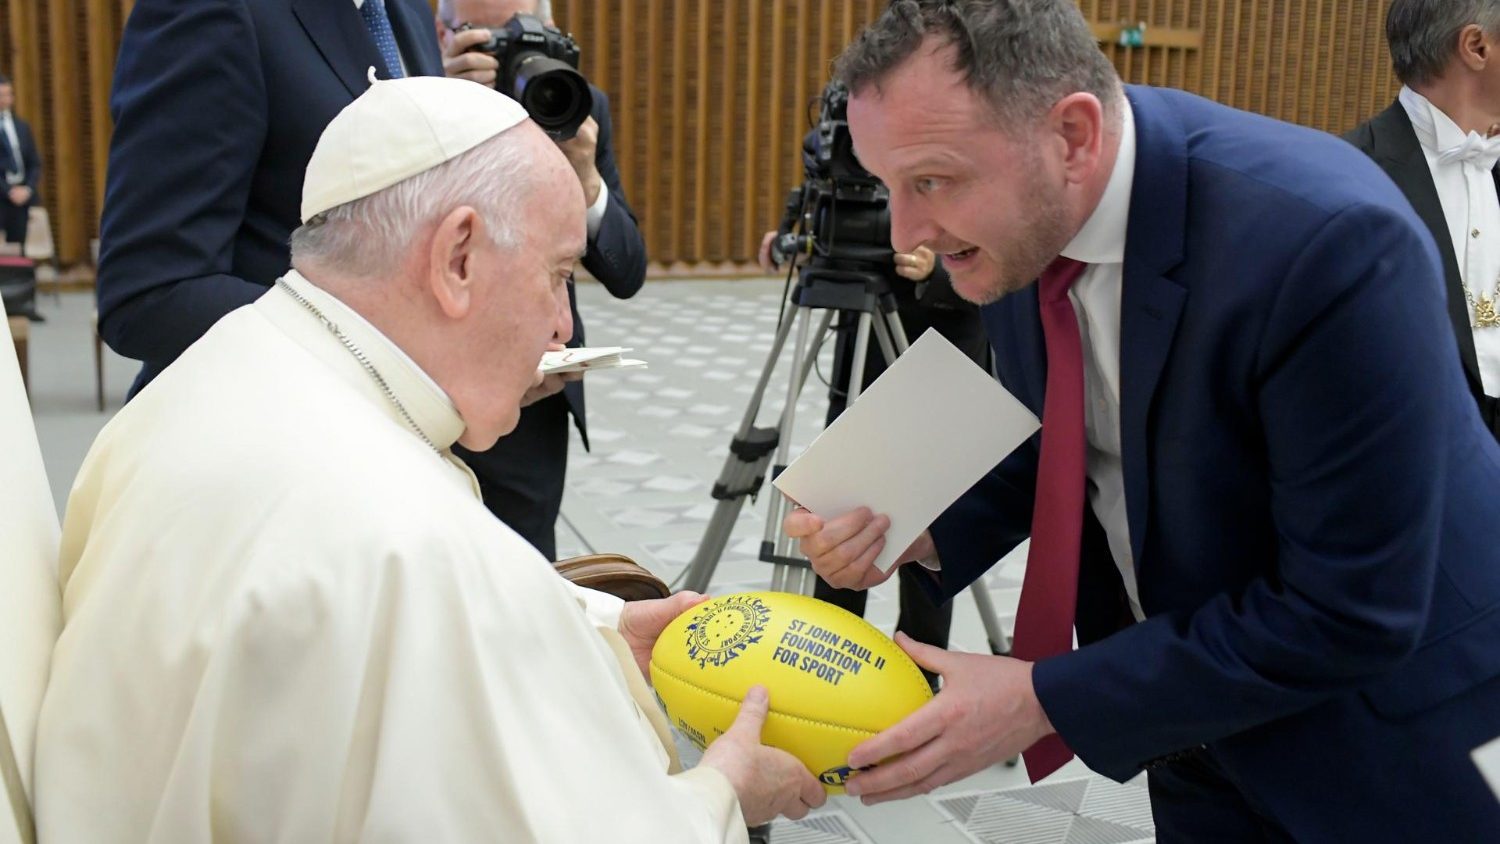 Pope: May sport be home for all, open and welcoming - Vatican News